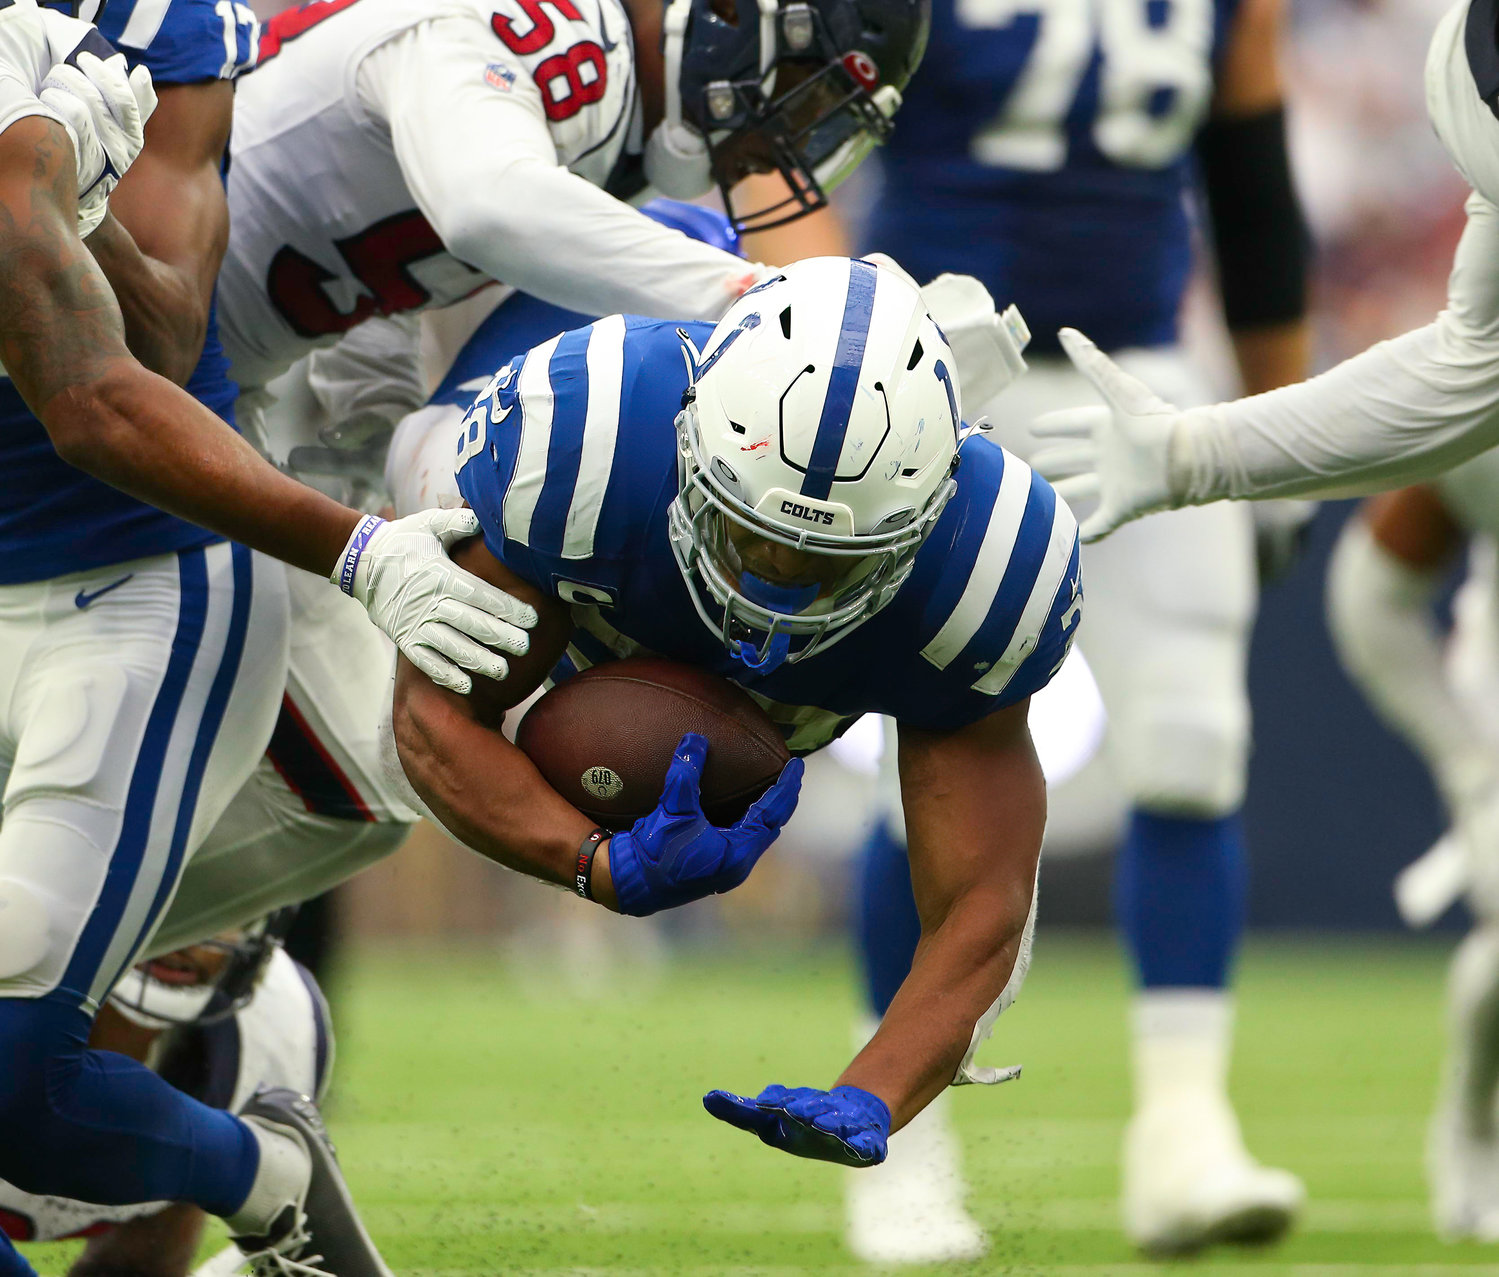 Indianapolis Colts running back Jonathan Taylor (28) dives forward for yardage during an NFL game between the Texans and the Colts on September 11, 2022 in Houston. The game ended in a 20-20 tie after a scoreless overtime period.